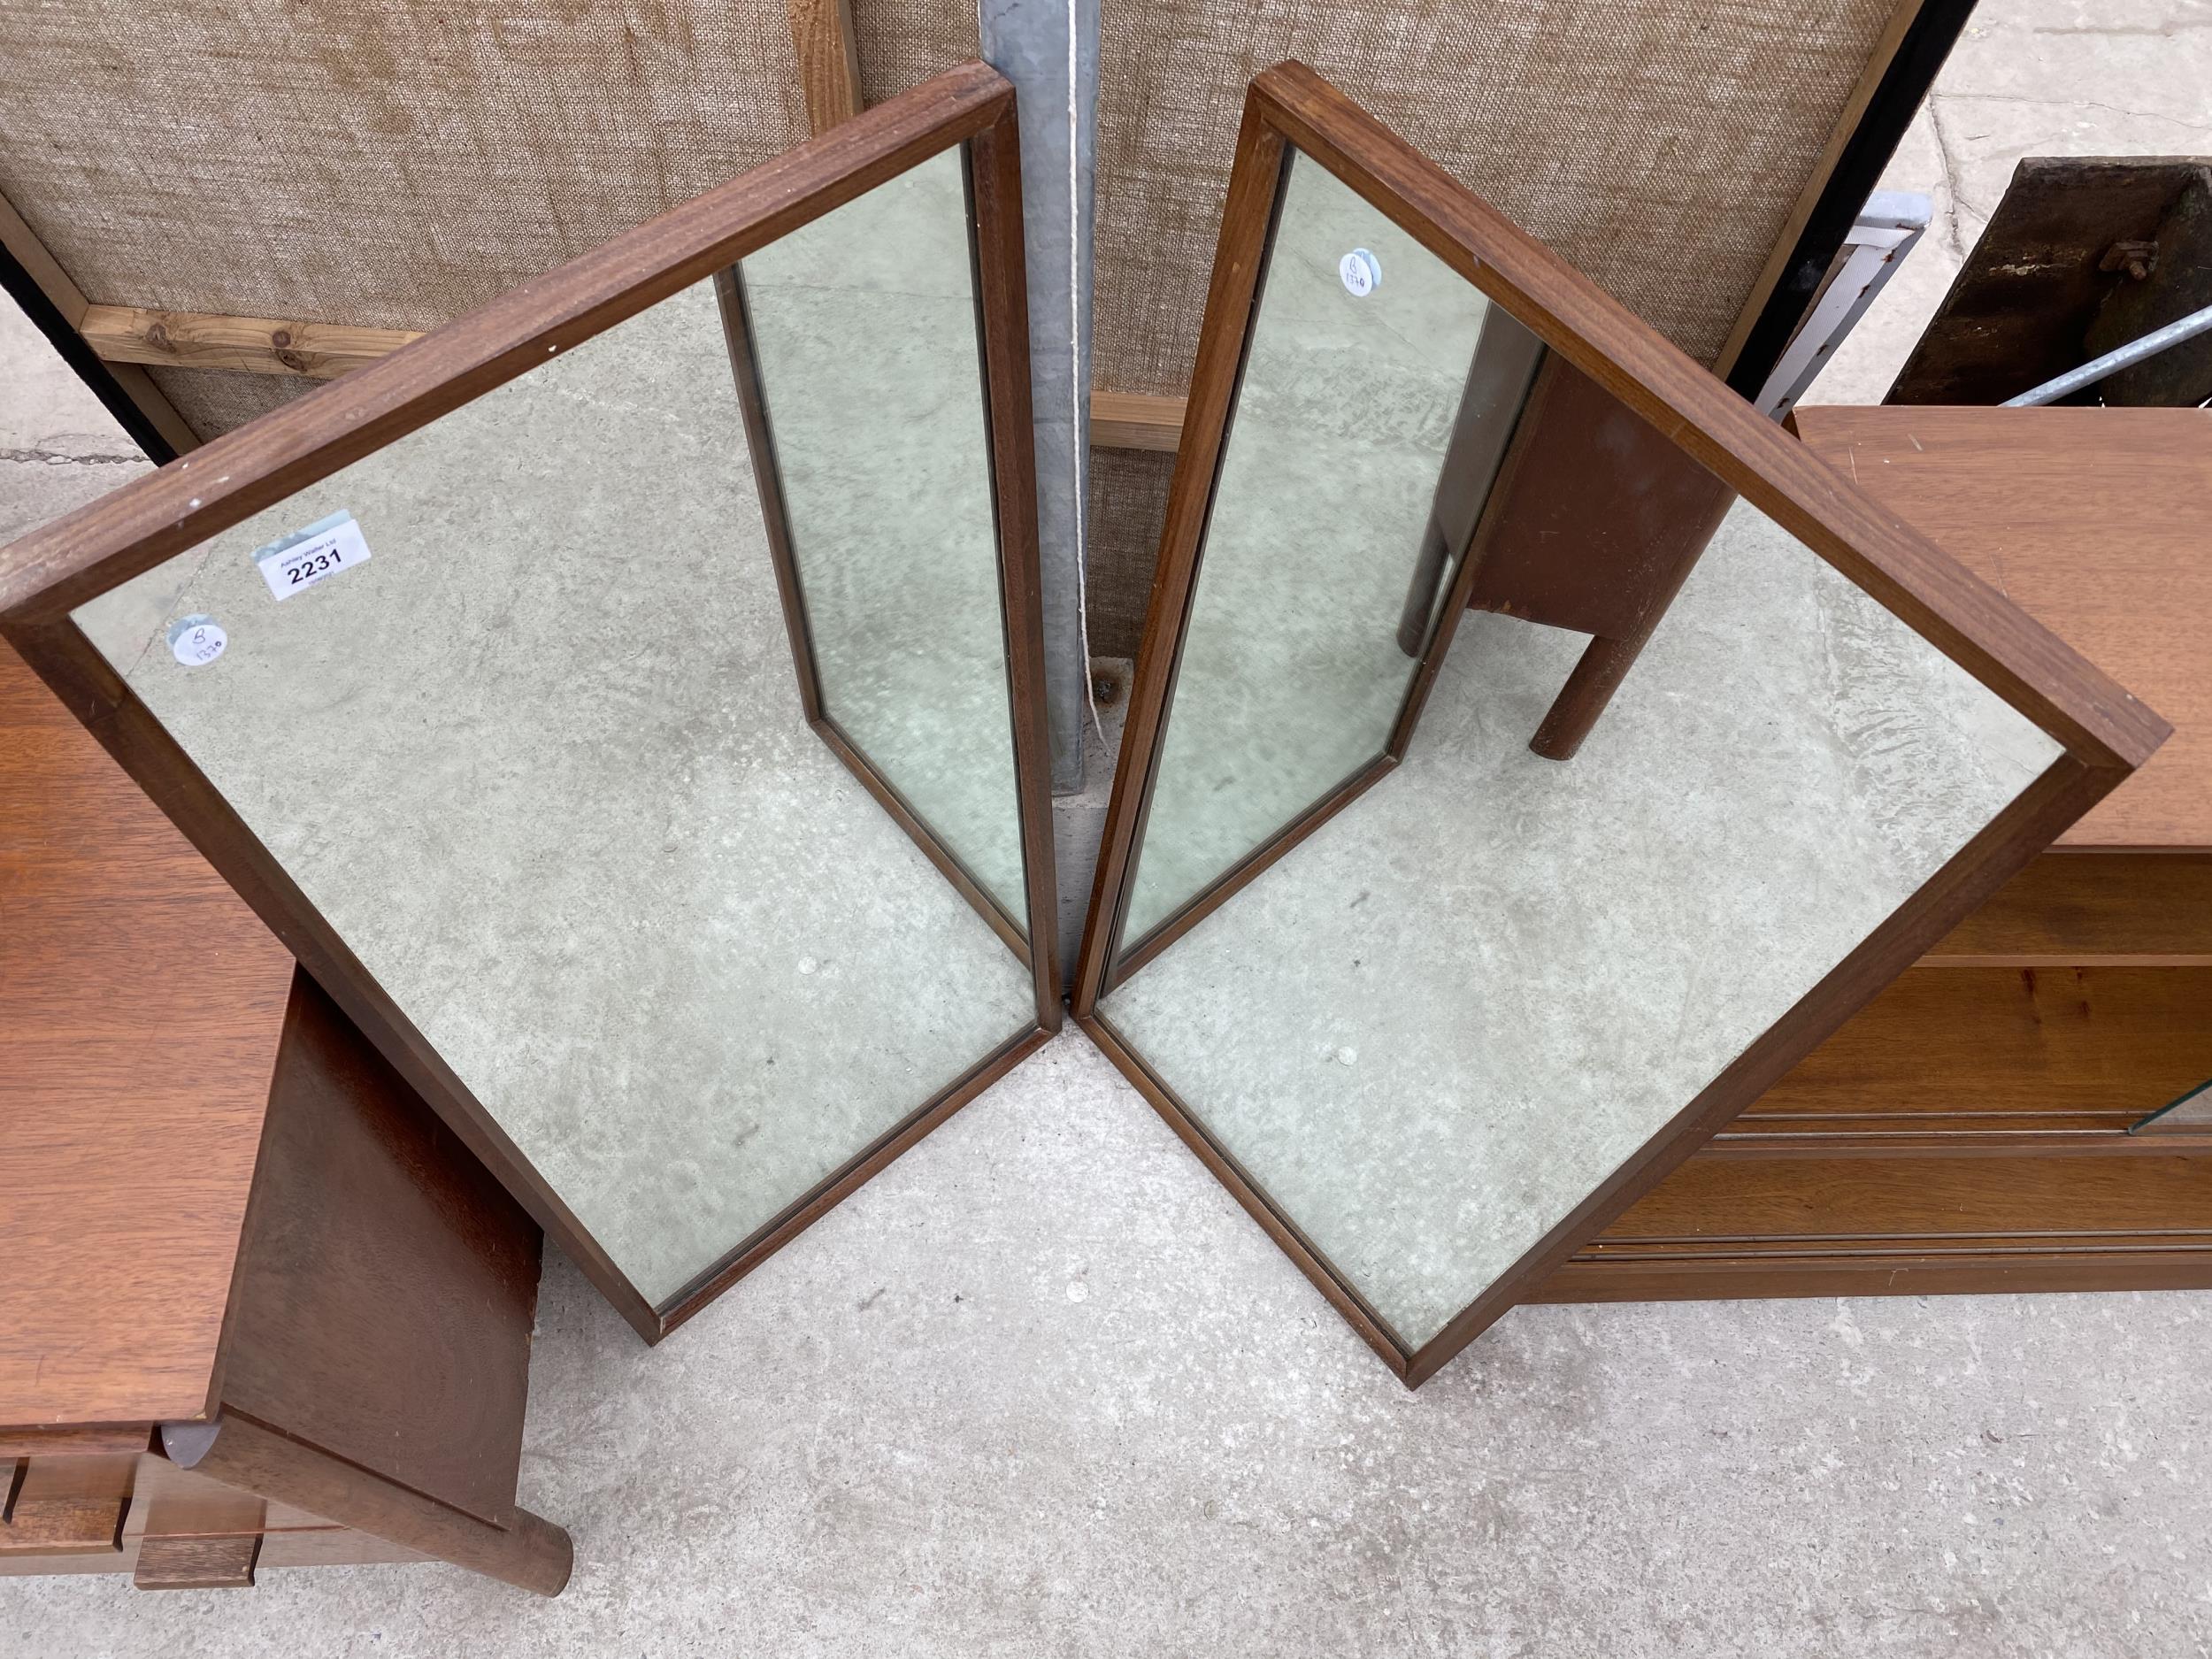 TWO RETRO TEAK FRAMED WALL MIRRORS 17"X38" - Image 2 of 5